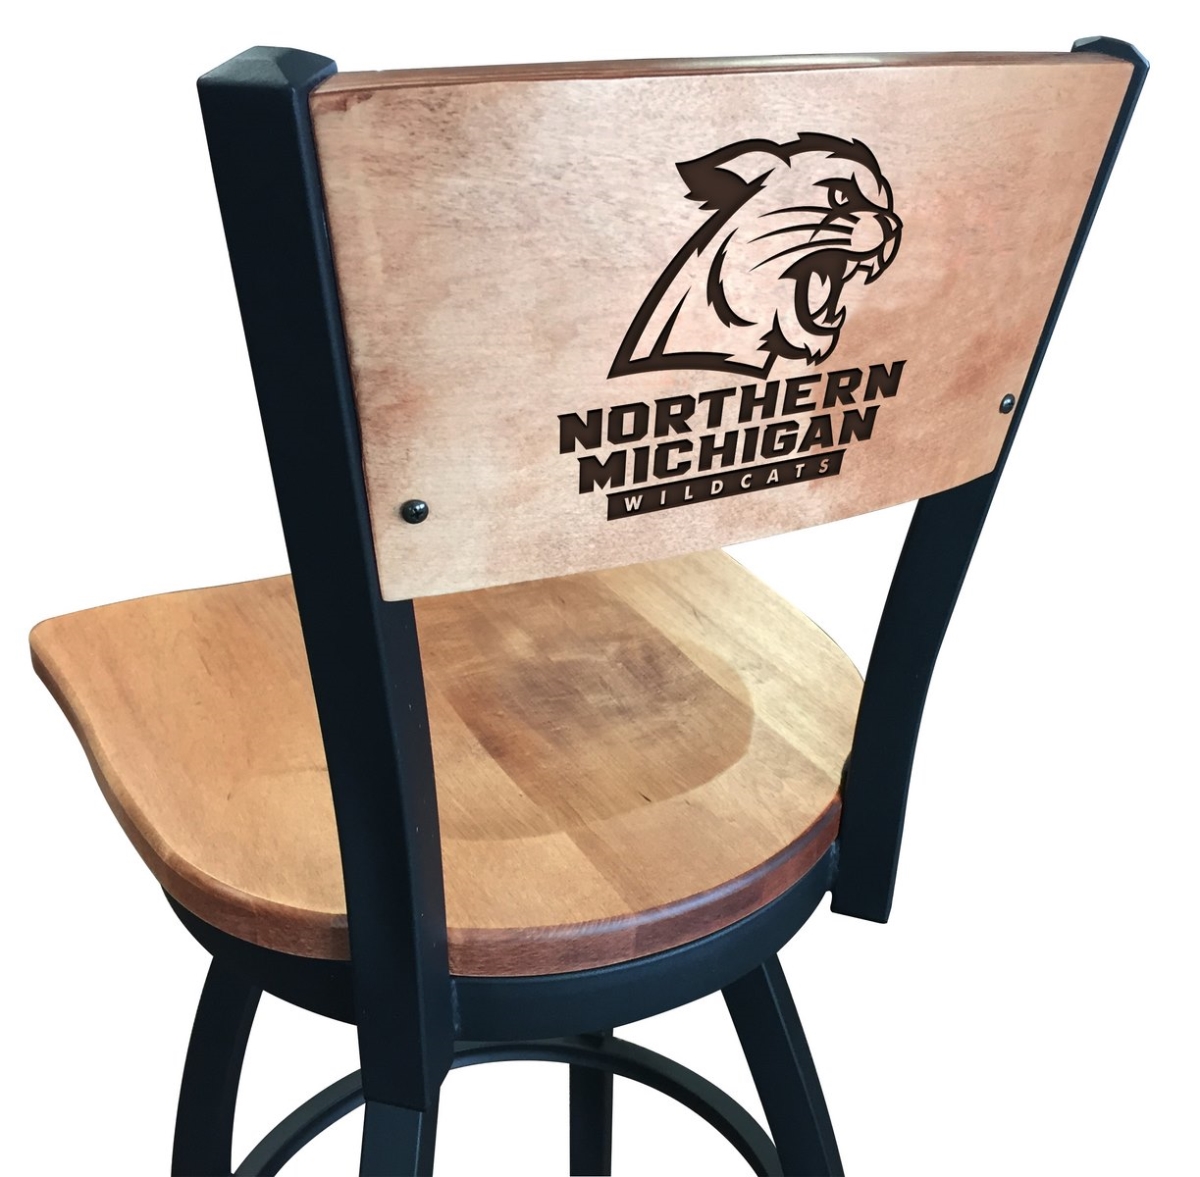 Picture of Holland Bar Stool L03830BWMedMplANorMicMedMpl 30 in. L038 - Black Wrinkle Northern Michigan Swivel Bar Stool with Laser Engraved Back